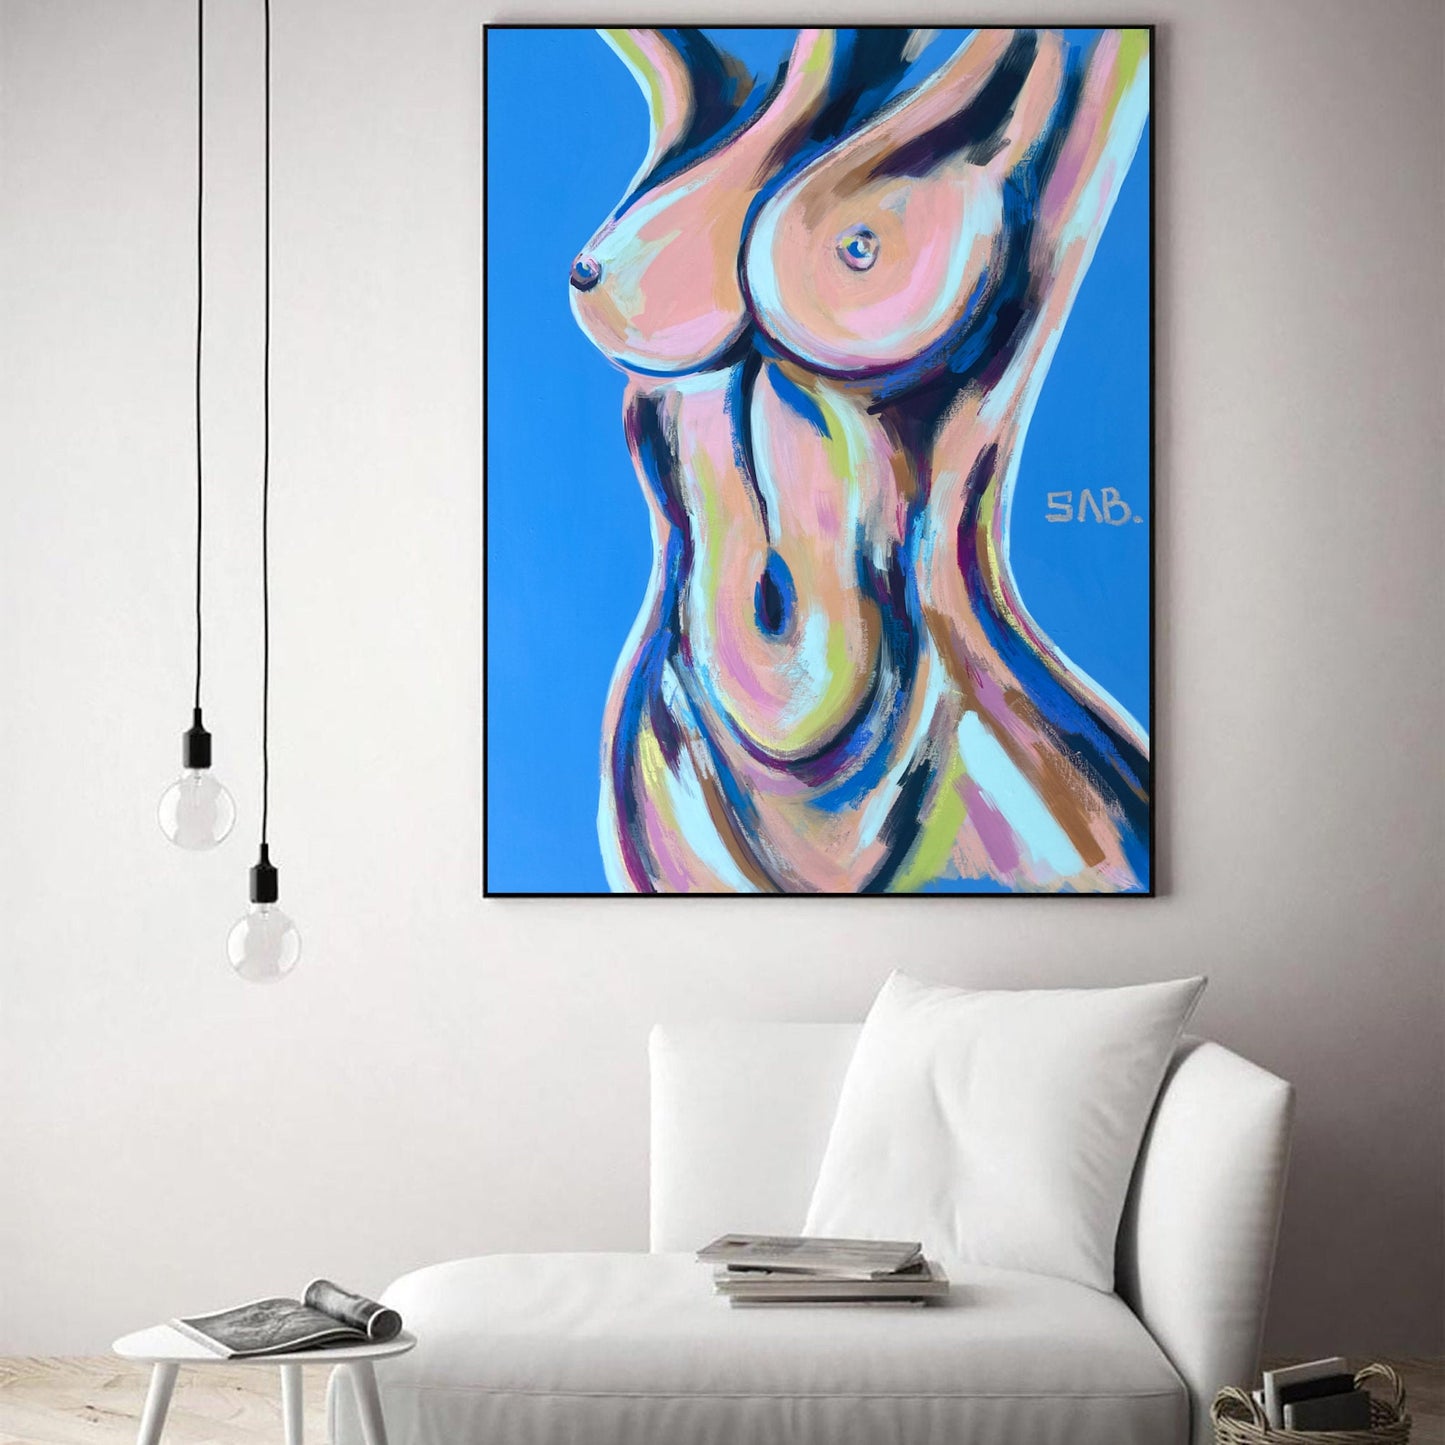 Female Figurative Nude sexy Colorful canvas painting art 30x40 naked LGBTQ pride rainbow feminist wall bedroom decor acrylic lesbian